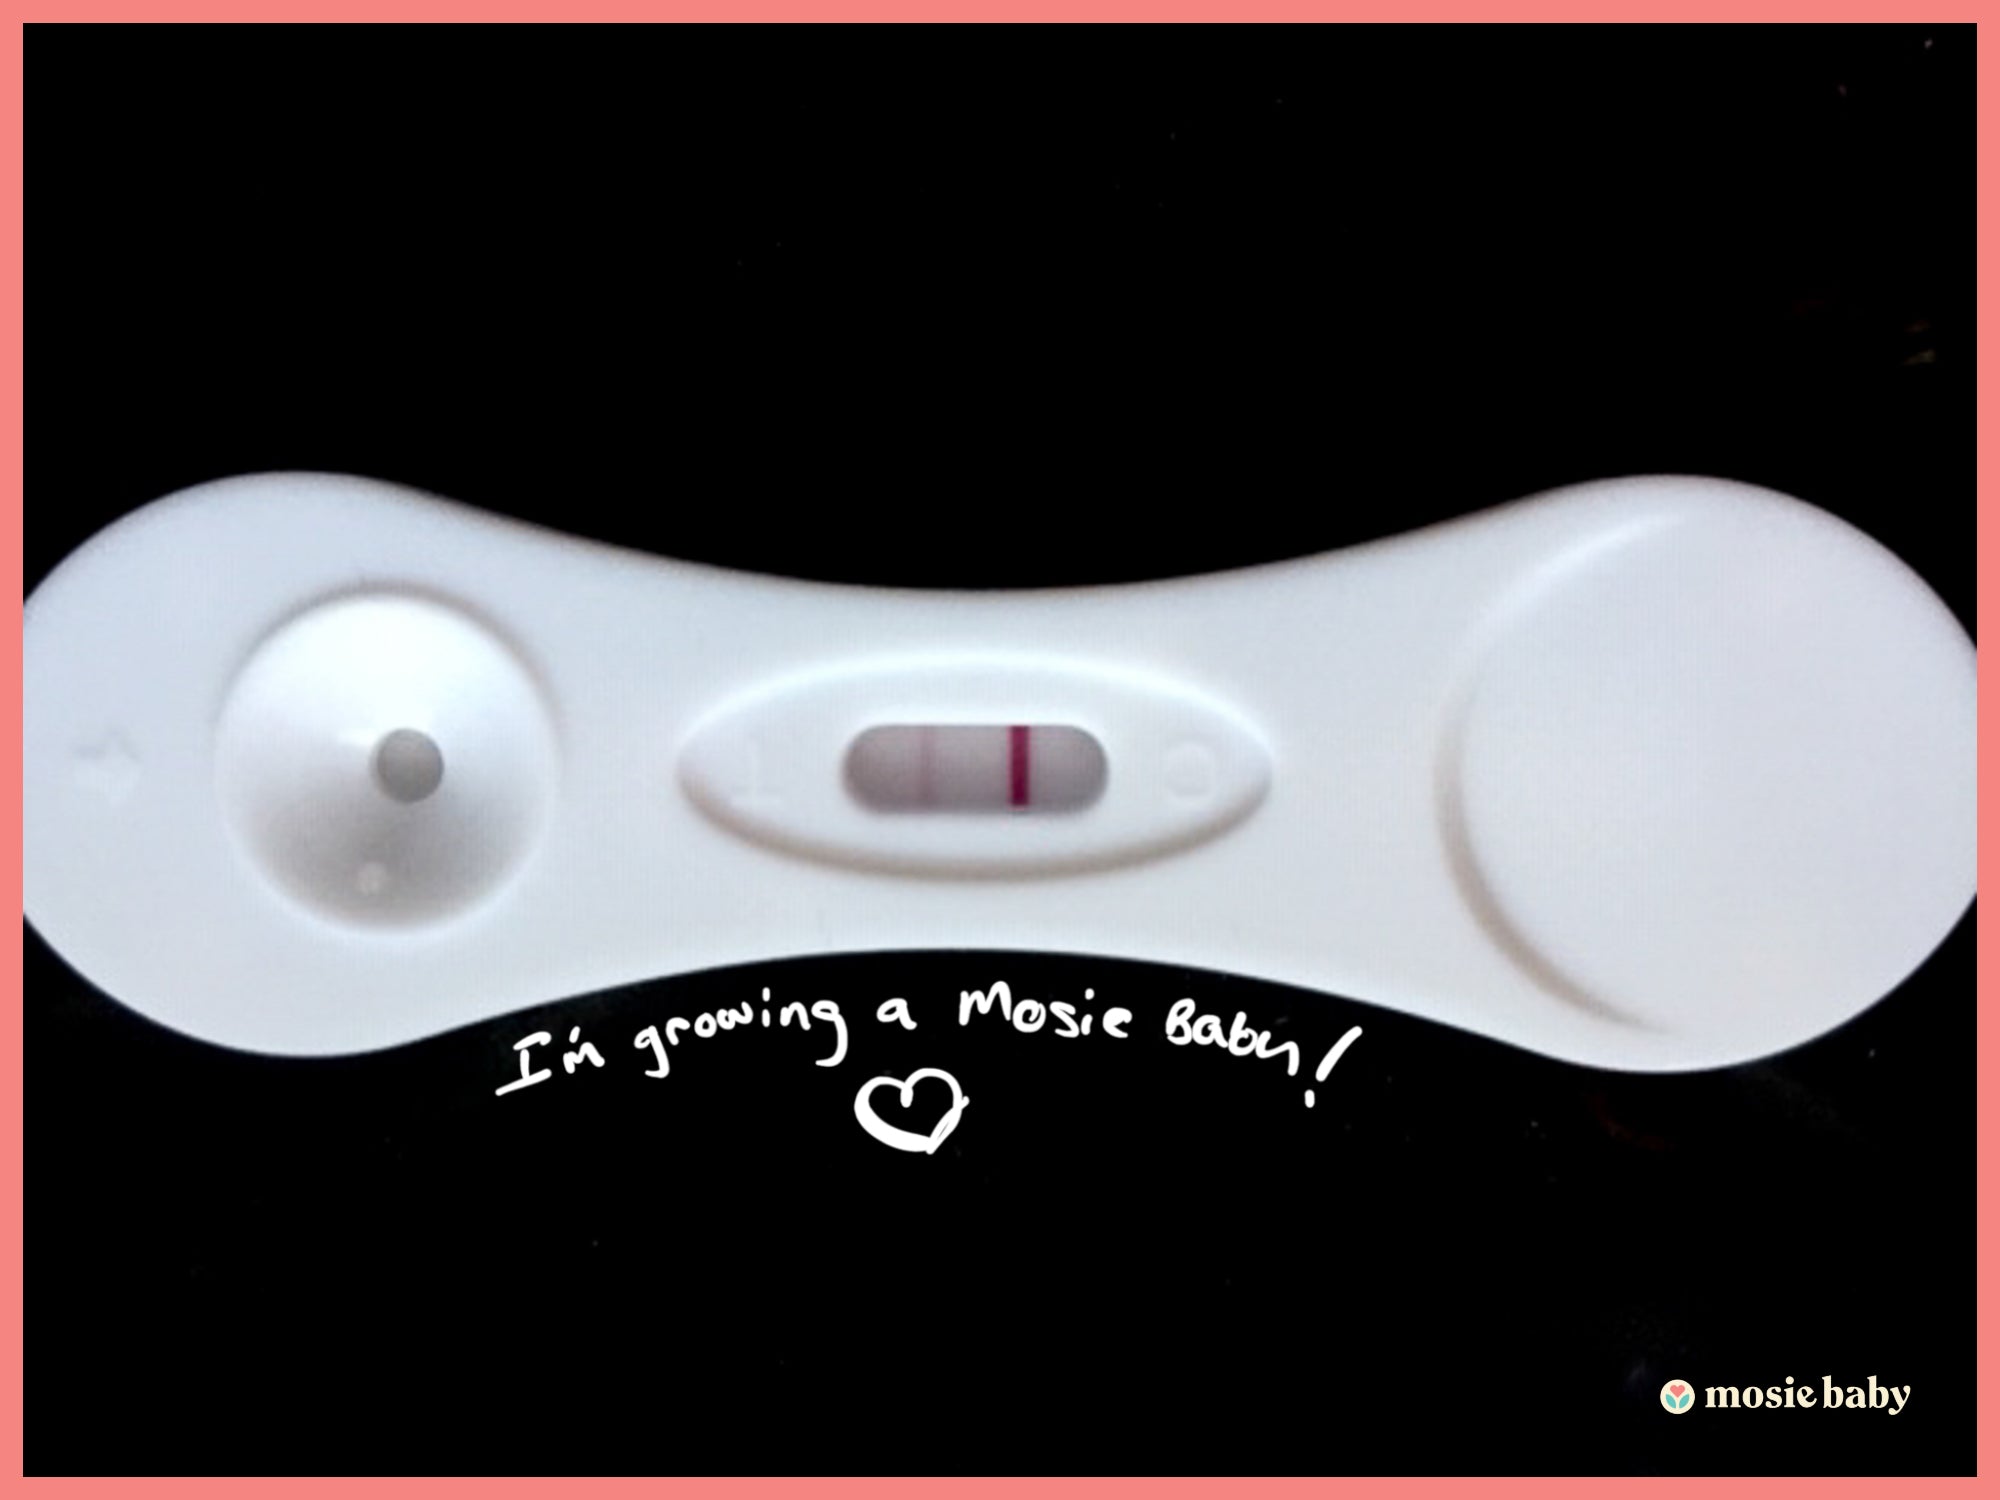 Positive pregnancy test with text "I'm growing a mosie baby"